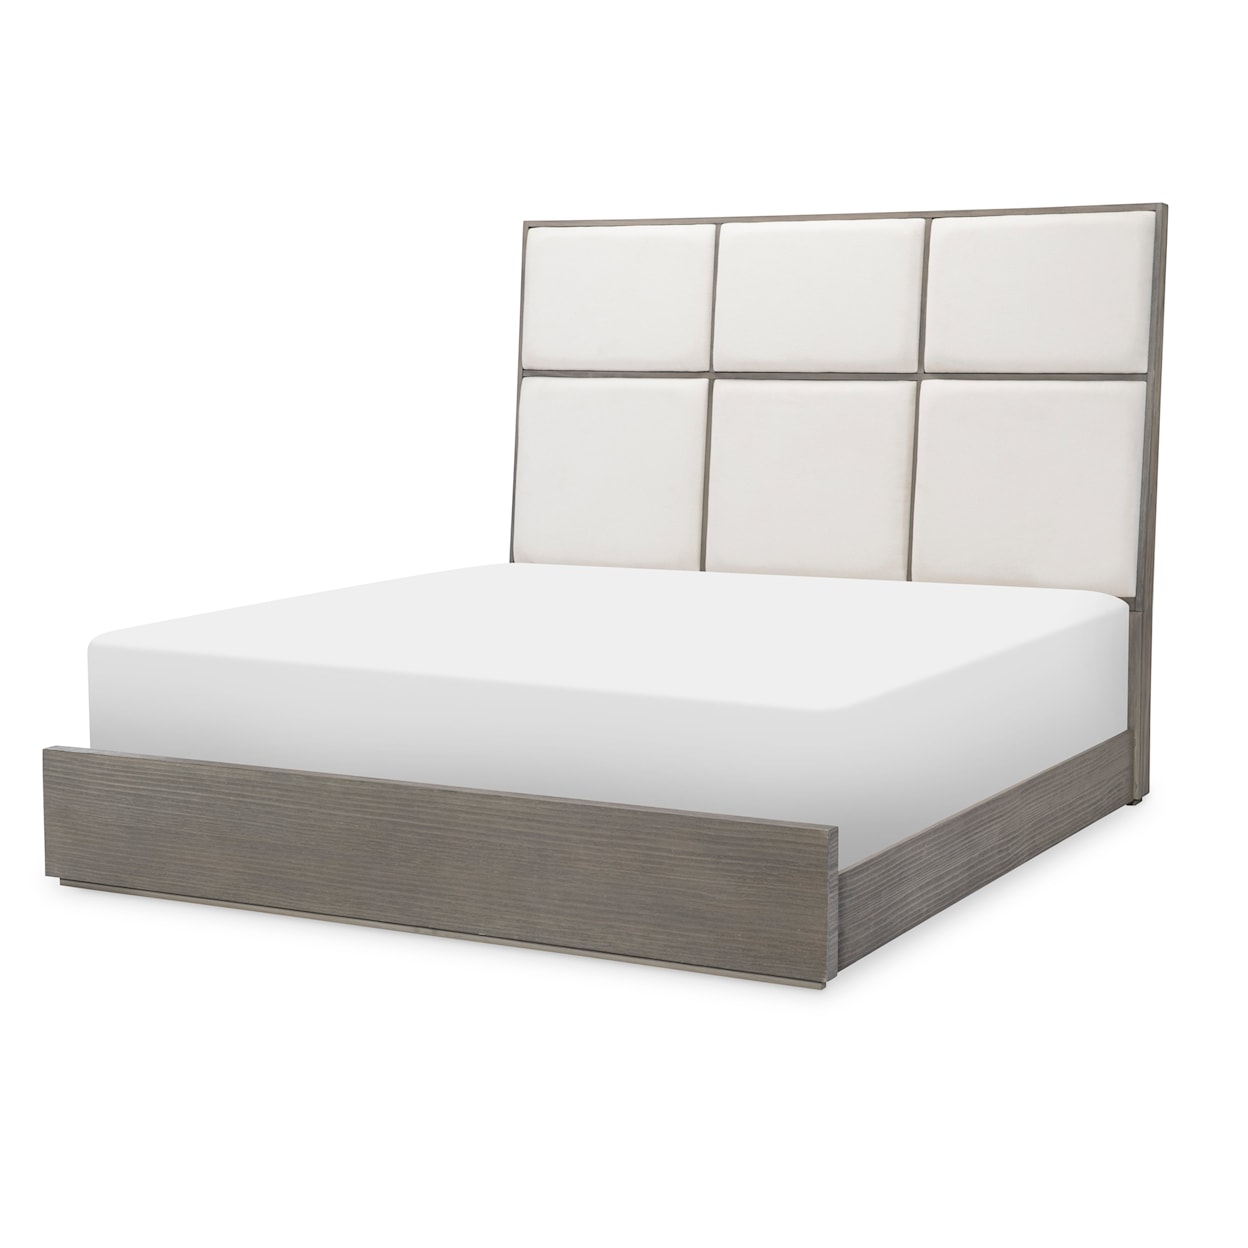 Legacy Classic TERRA LUNA Upholstered Bed